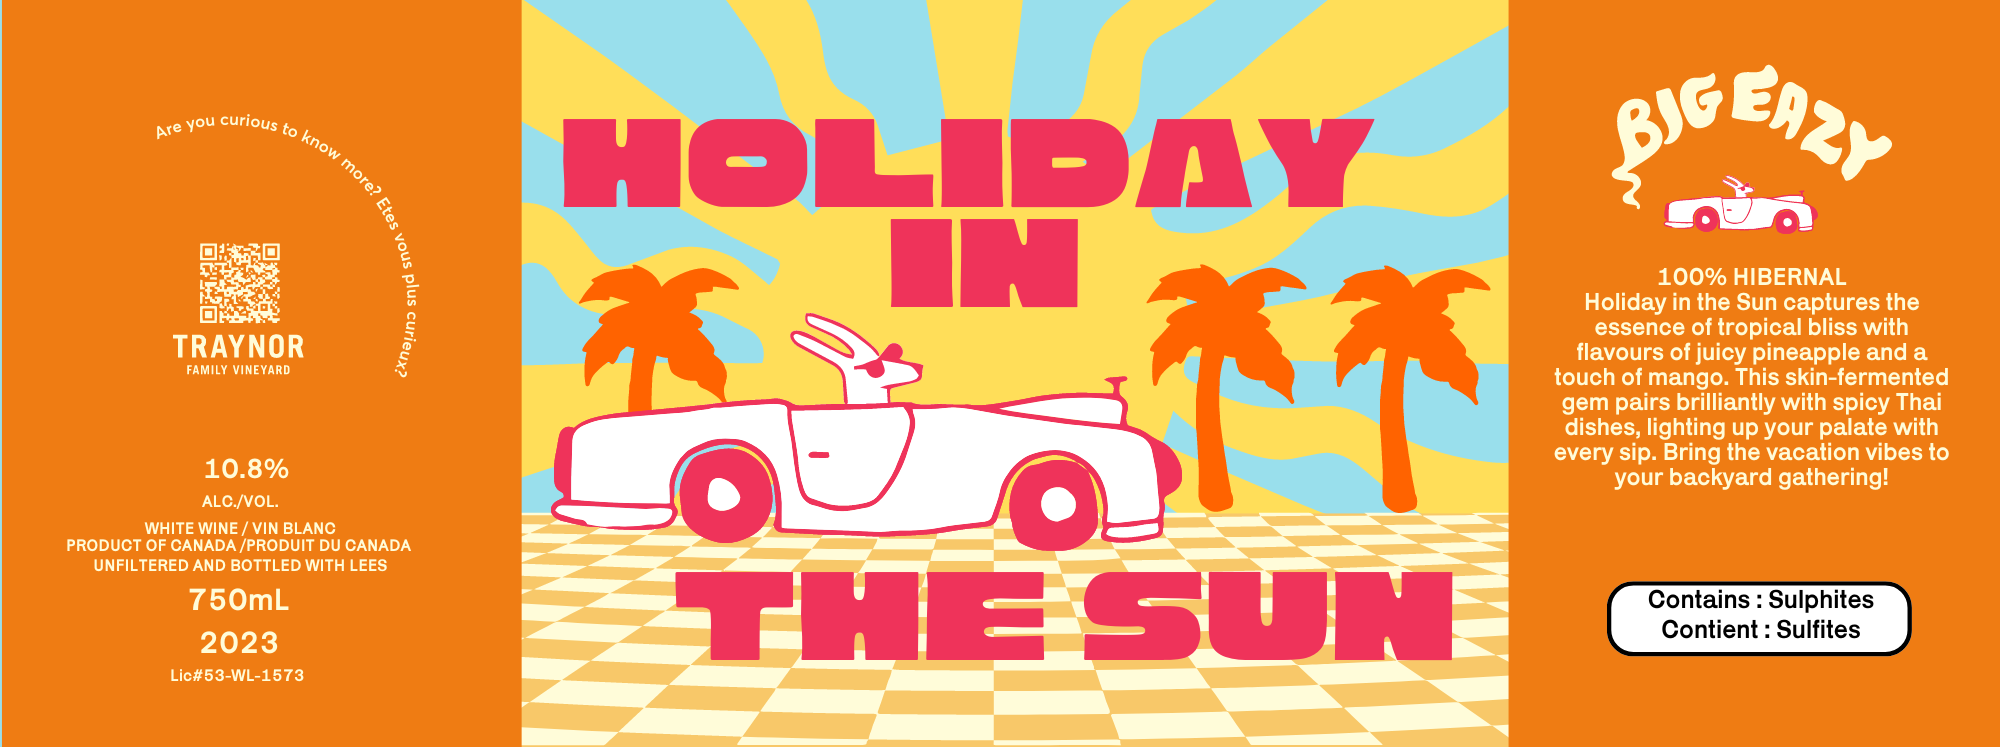 Holiday in the Sun Label